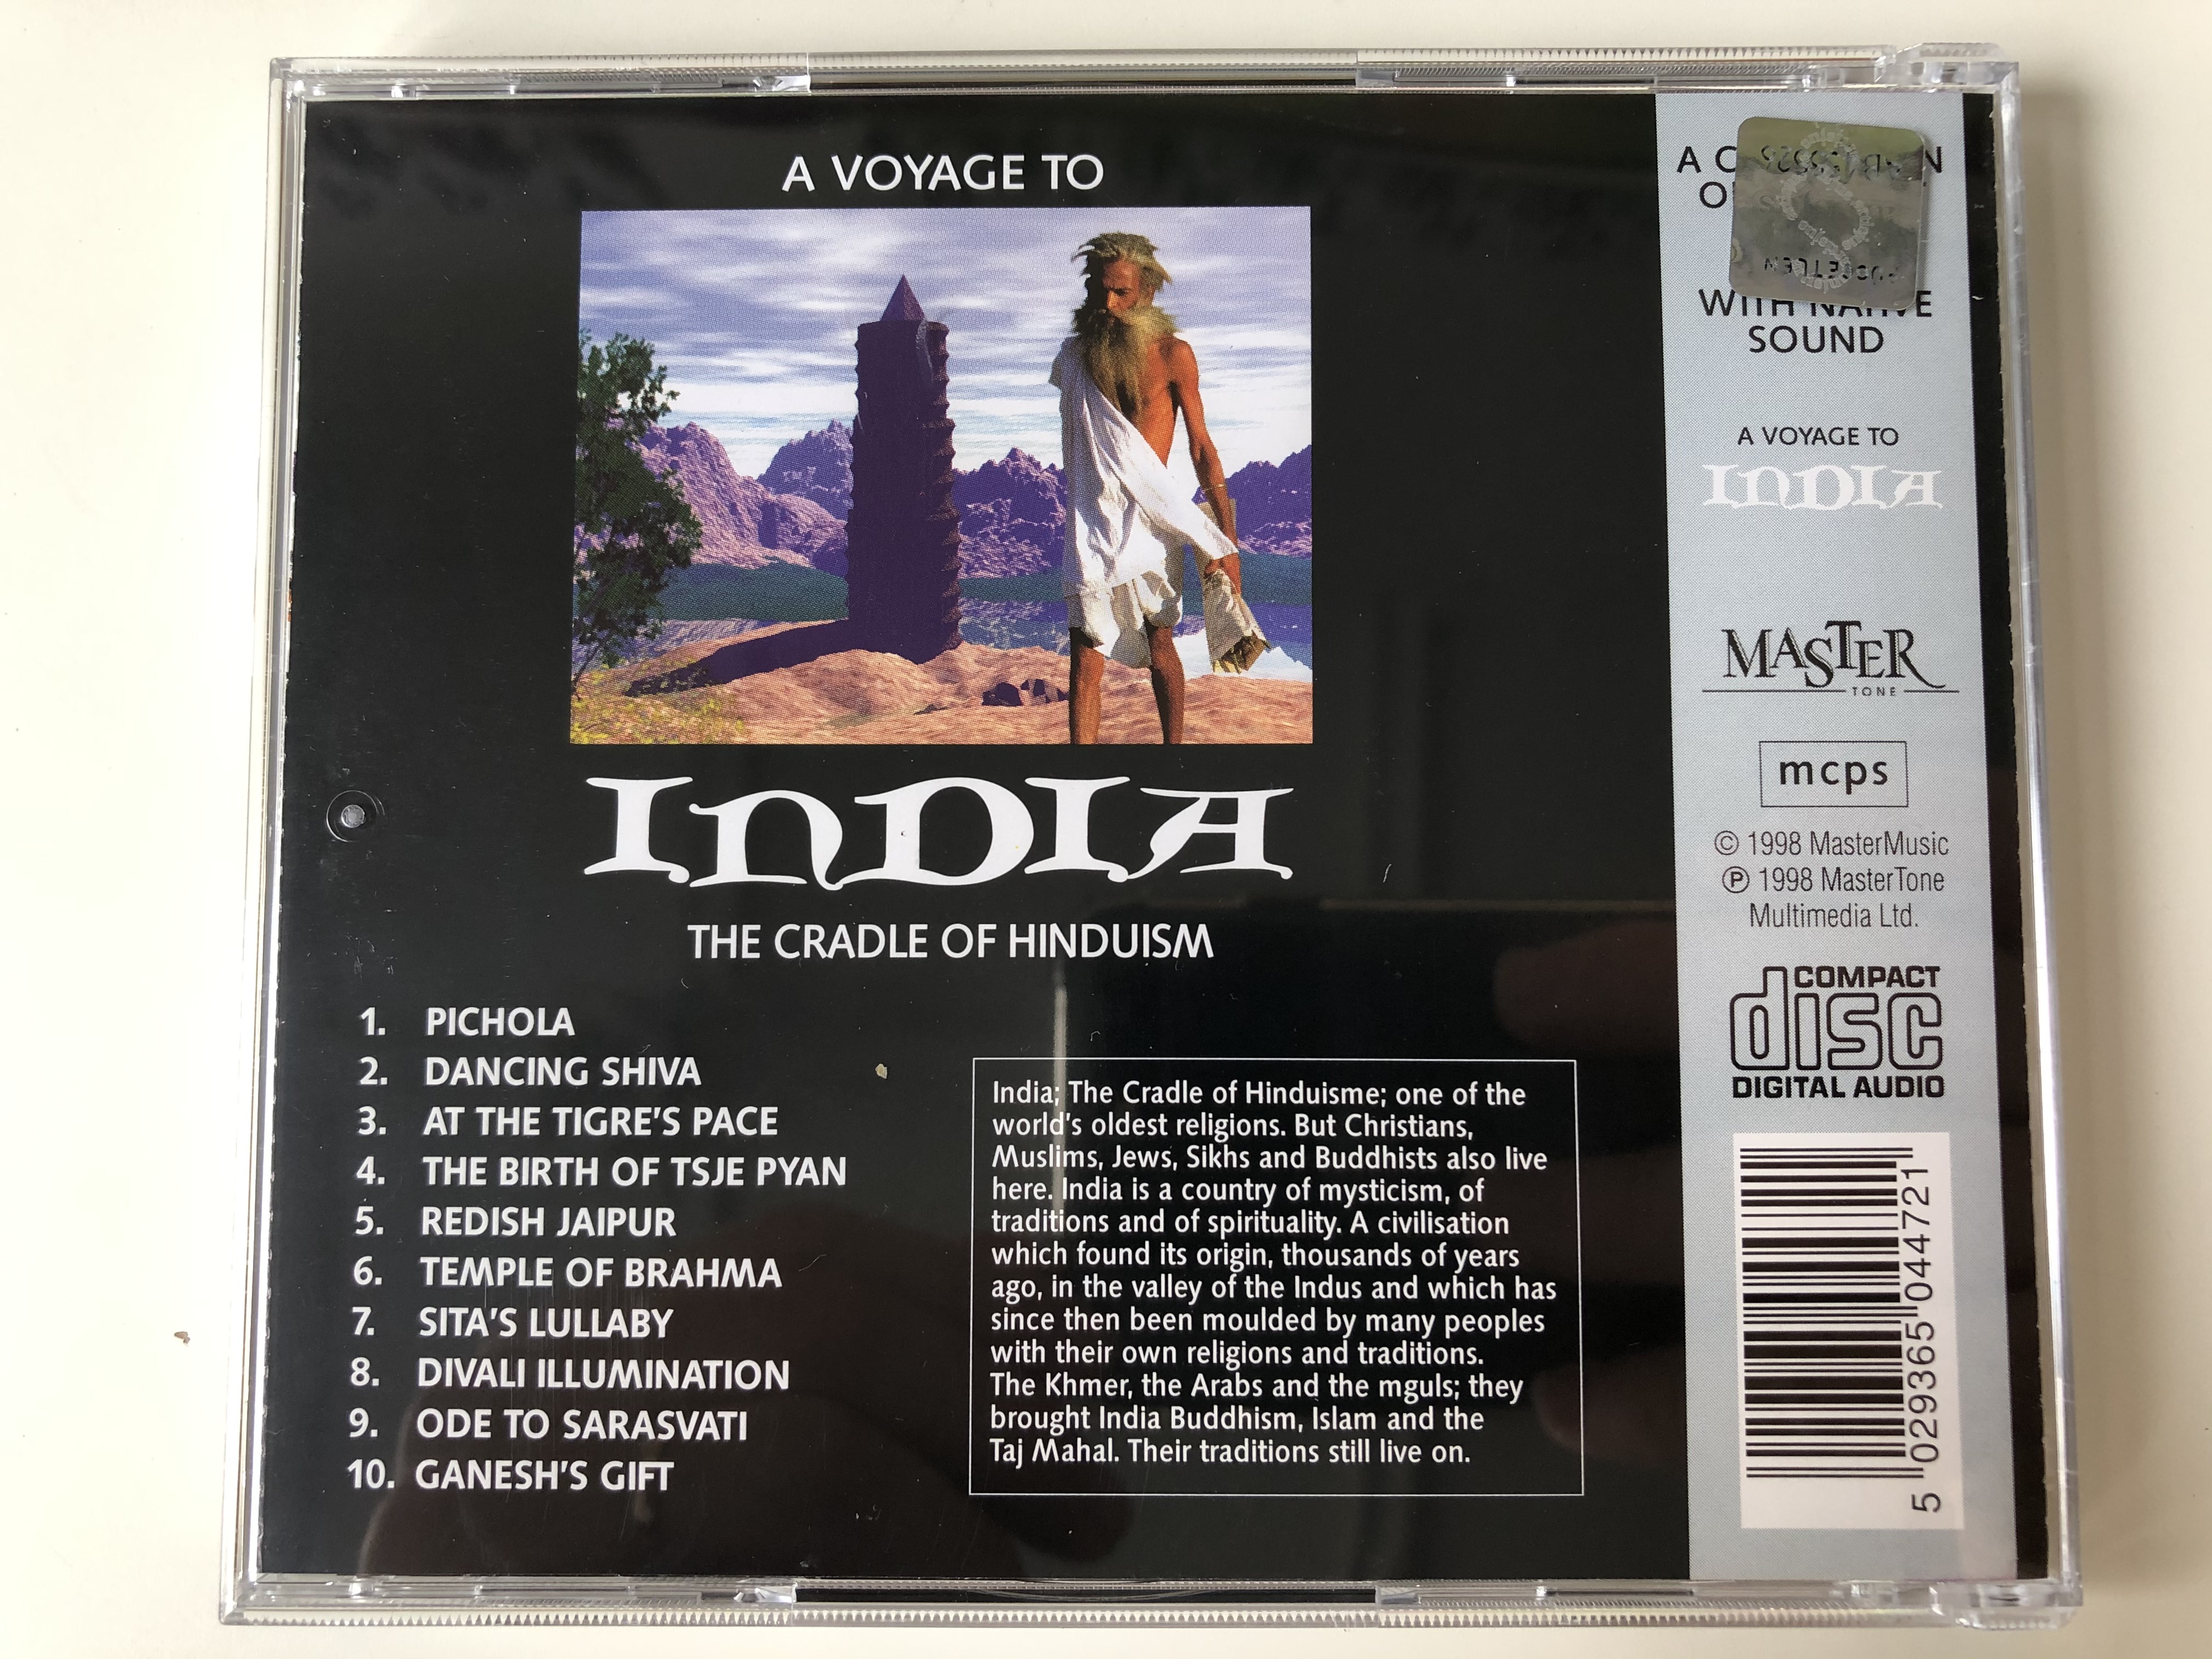 a-voyage-to-india-a-collection-of-ambient-music-remixed-with-native-sound-mastertone-audio-cd-1998-0447-4-.jpg